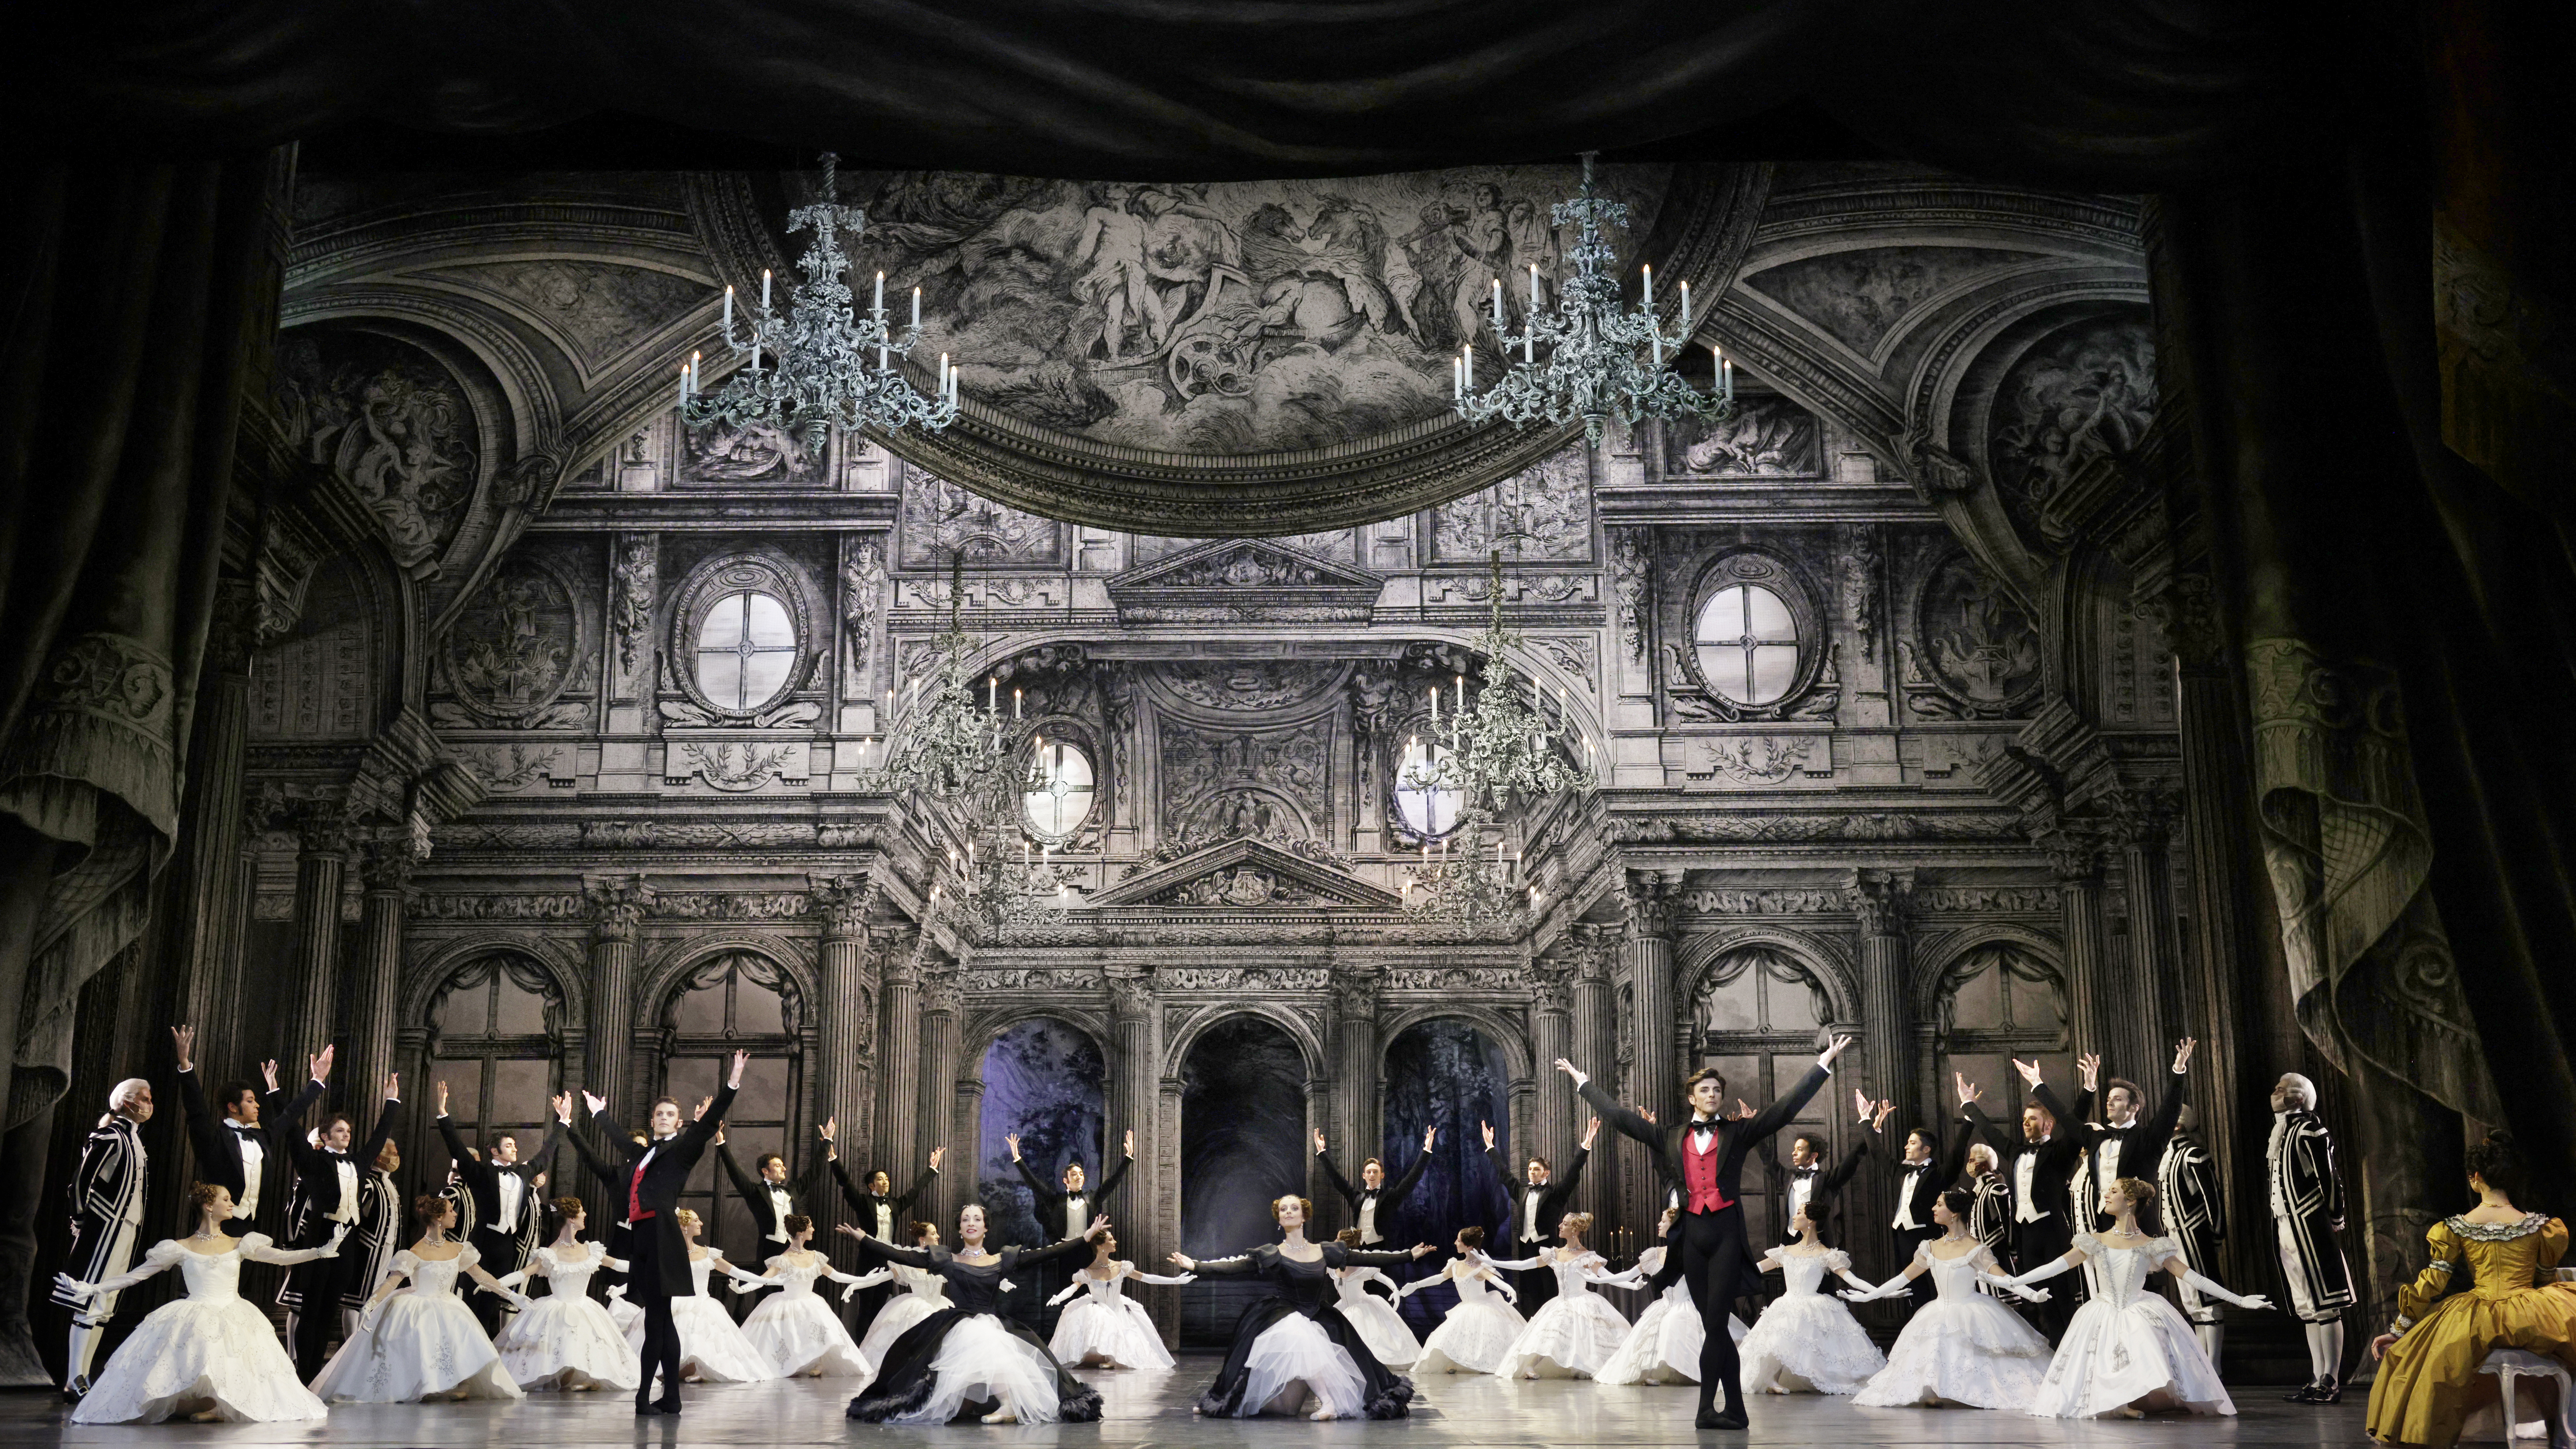 A large company of dancers pose in front of an elaborate ballroom set onstage. Four soloists form a line at the front of the stage, the women kneeling in between the two standing men. Behind them, 14 dancers form a V-shape formation, the women kneeling and their male partners standing behind them with their arms up. All of the men wear tuxedo jackets, black tights and balck slippers, while the women wear long tutu dresses with puffed sleeves.